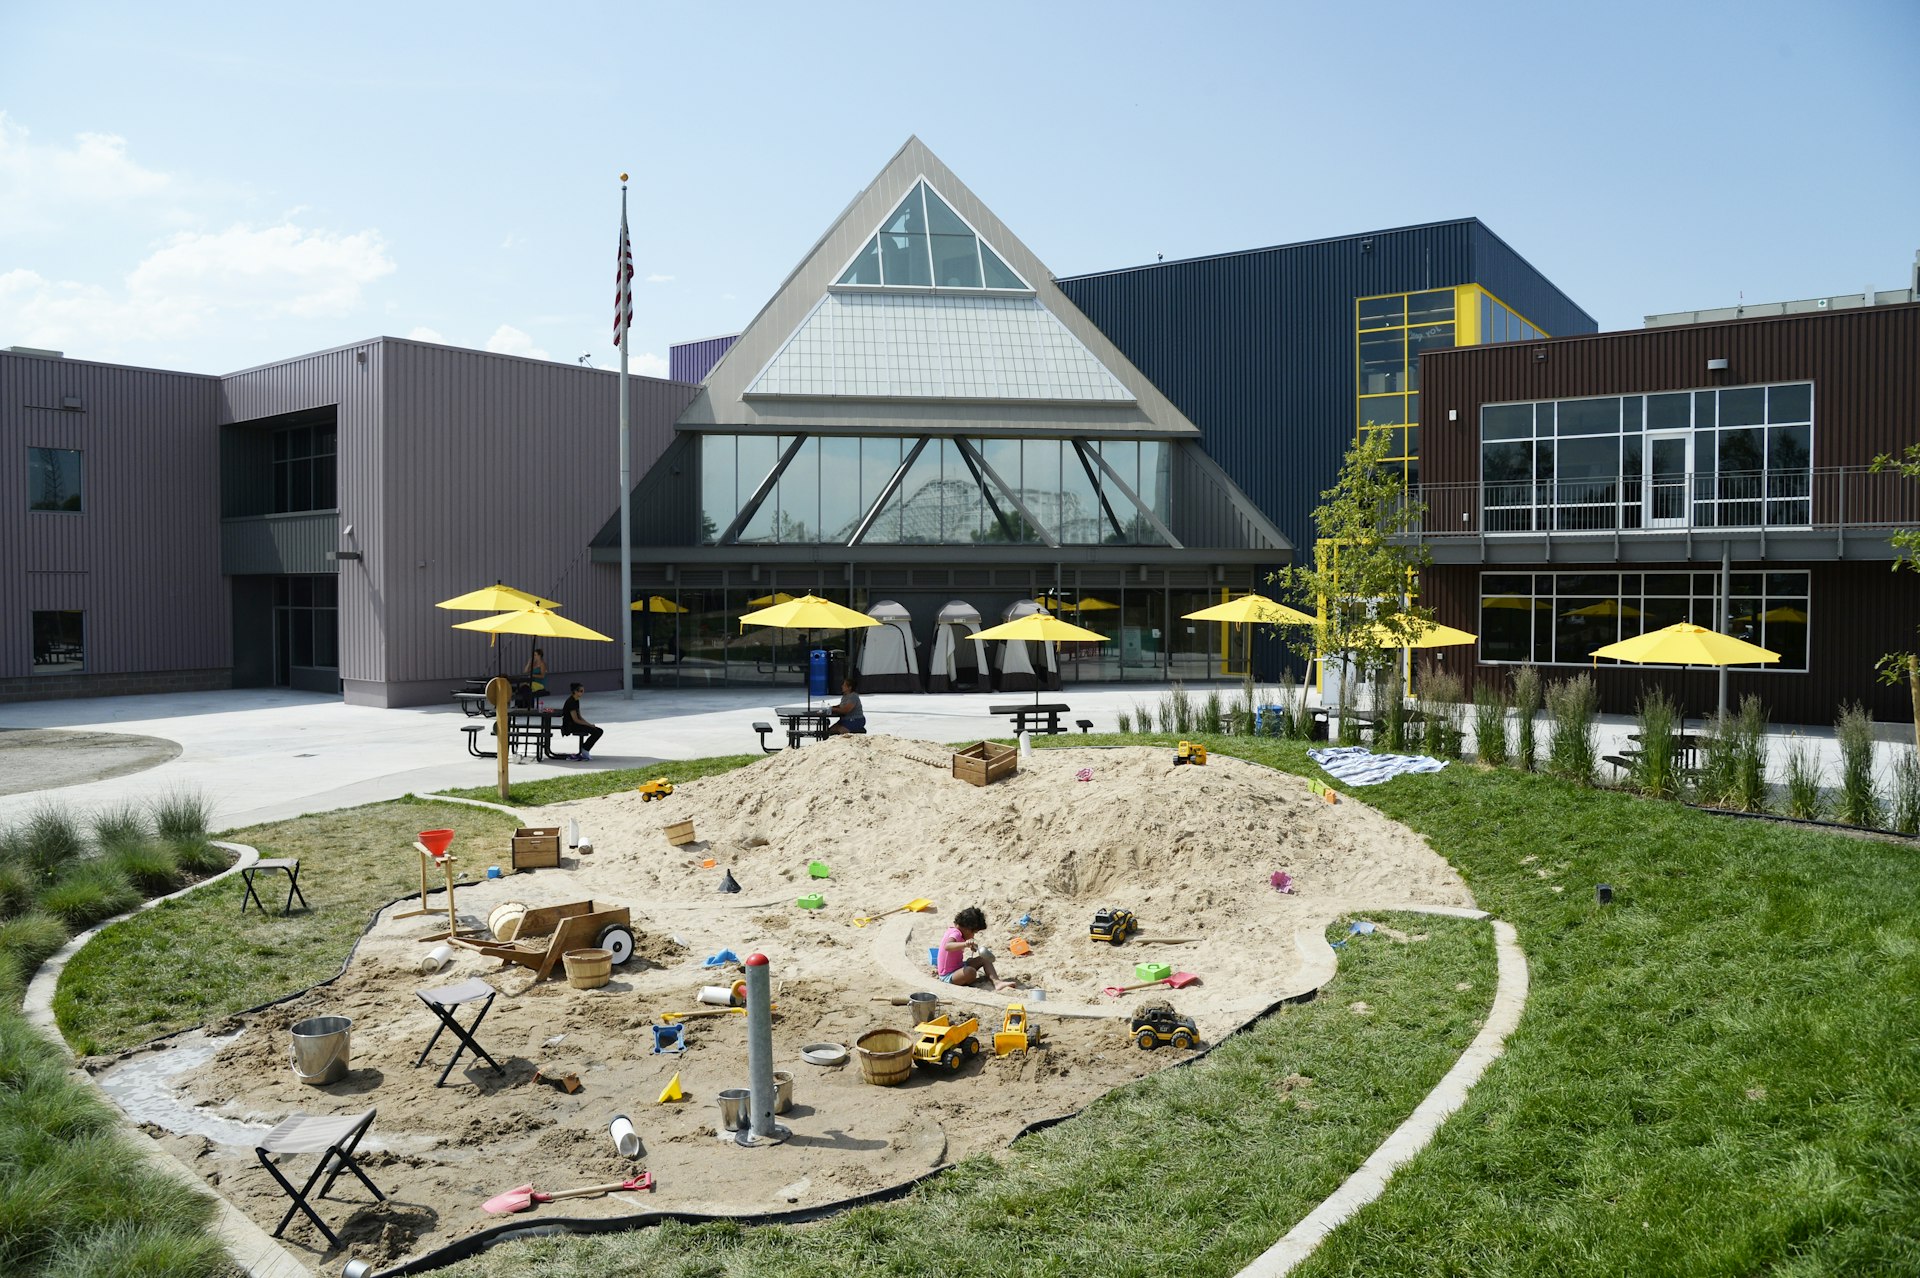 A child plays in the sand area of Joy Park at the Denver Children's Museum in Denver, Colorado.